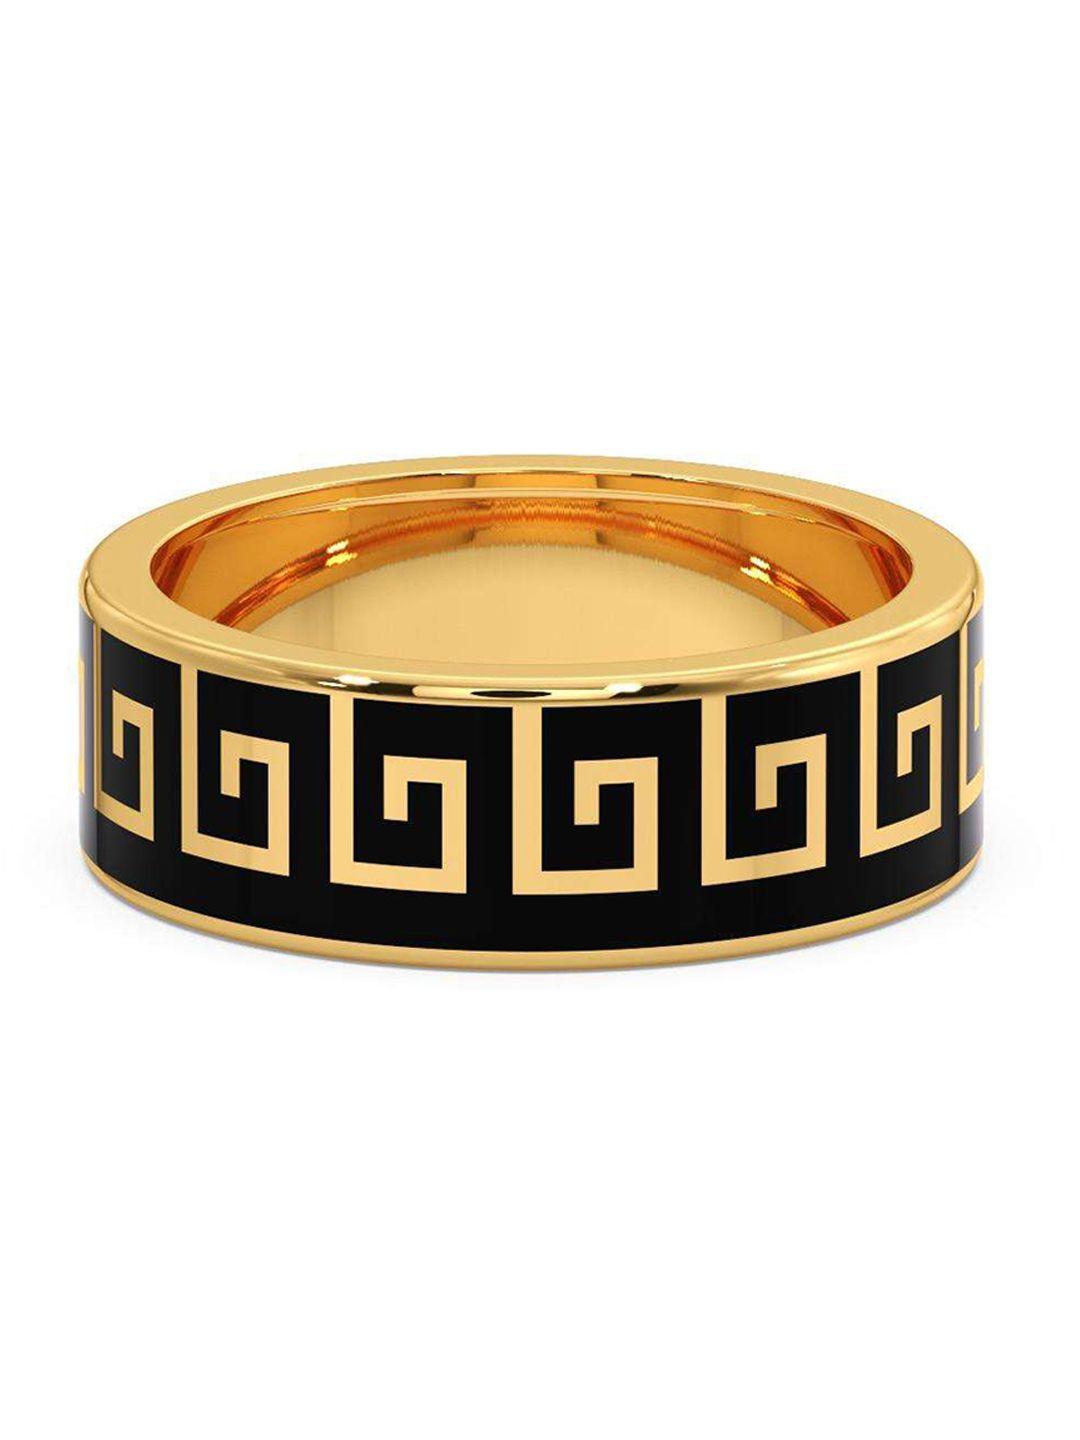 candere-a-kalyan-jewellers-company-men-18kt-gold-ring-5.0gm